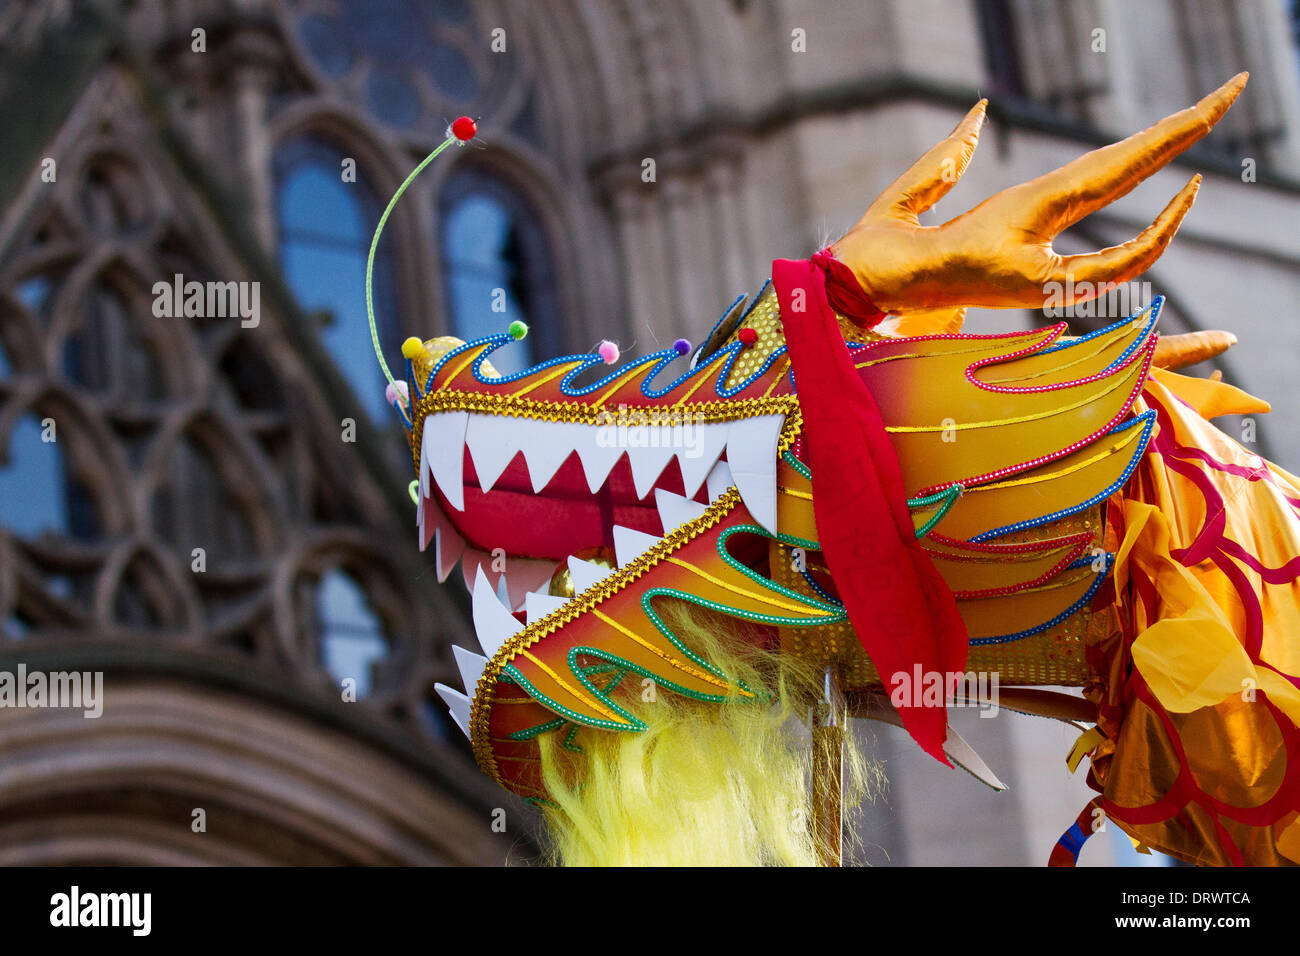 Chinese costume zodiac animals. Traditional golden New Year dragon dance festival inChinatown February, 2104.   High pole dragon dance at the Chinese New Year in Albert Square, Manchester the North's biggest Chinese New Year celebrations. Manchester's Chinatown is one of Europe's biggest tucked into a narrow grid of streets behind Piccadilly Gardens.  With a 175-foot paper dragon, a lion dance, martial arts demonstrations, the Dragon Parade is one of the highlights of Manchester's annual events calendar. Stock Photo